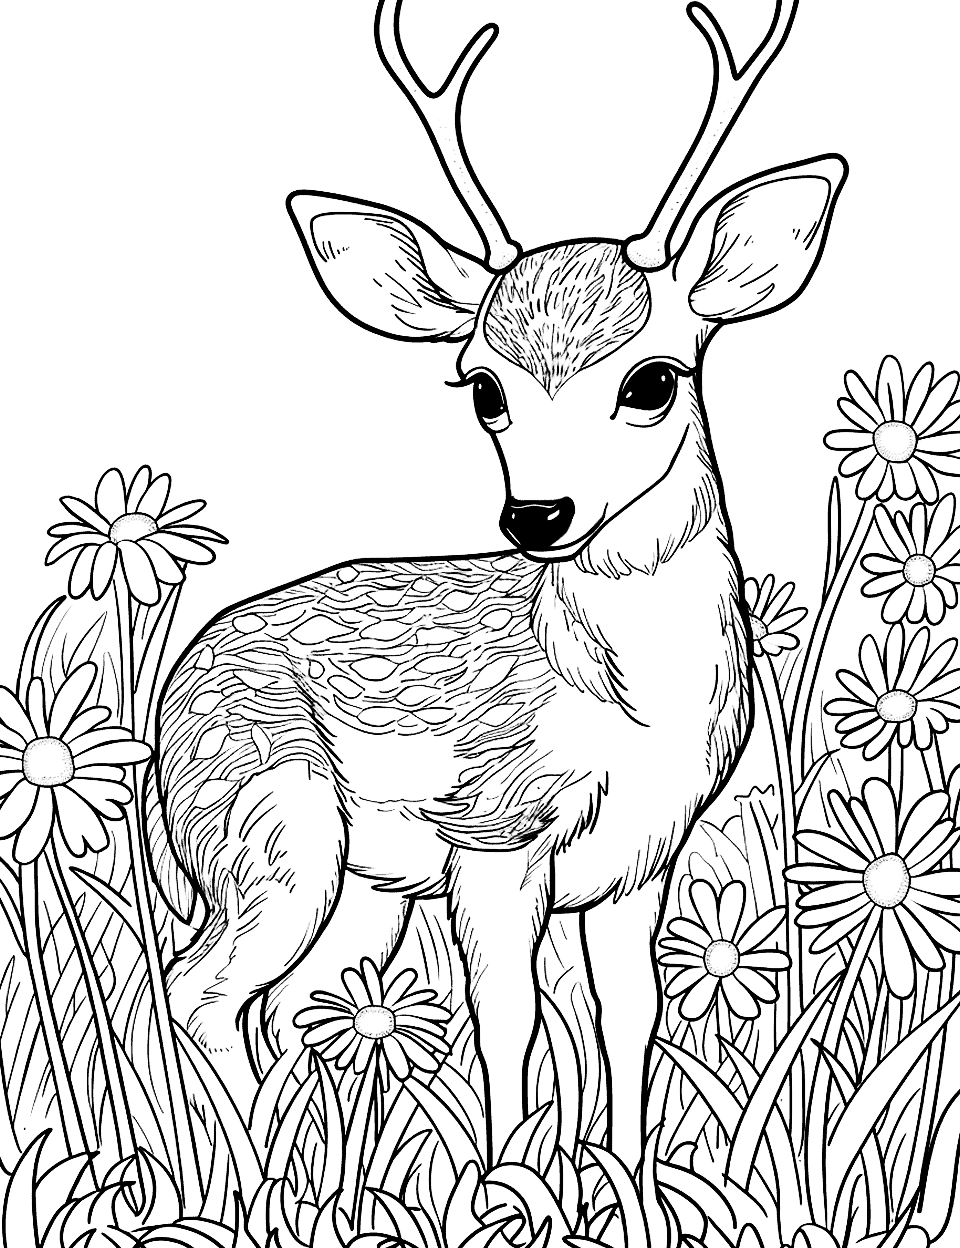 Baby Deer Amongst Daisies Coloring Page - A baby deer surrounded by white daisies in a field.